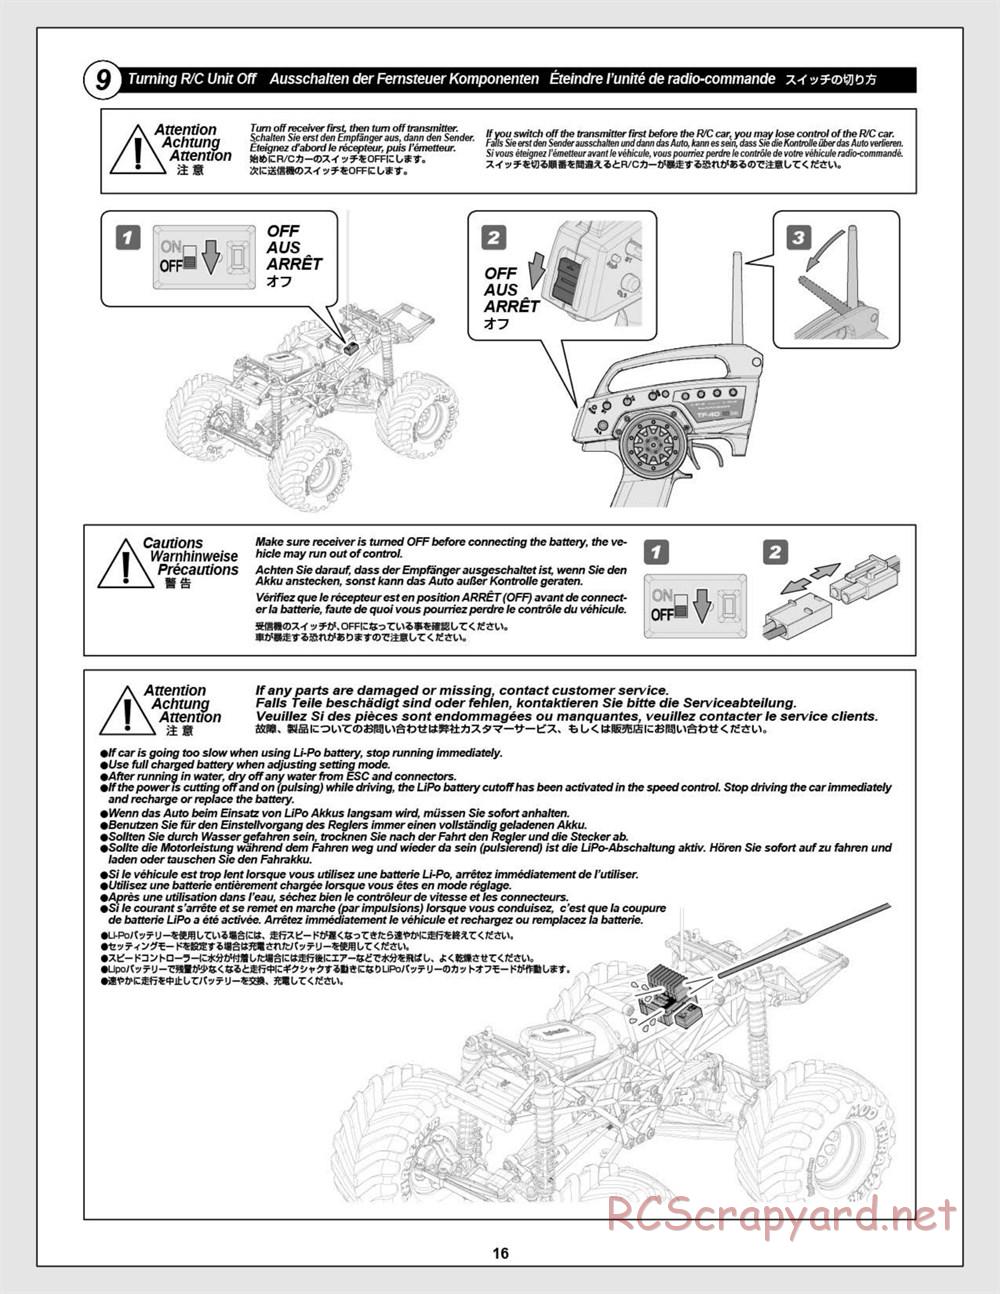 HPI - Wheely King 4x4 - Manual - Page 16